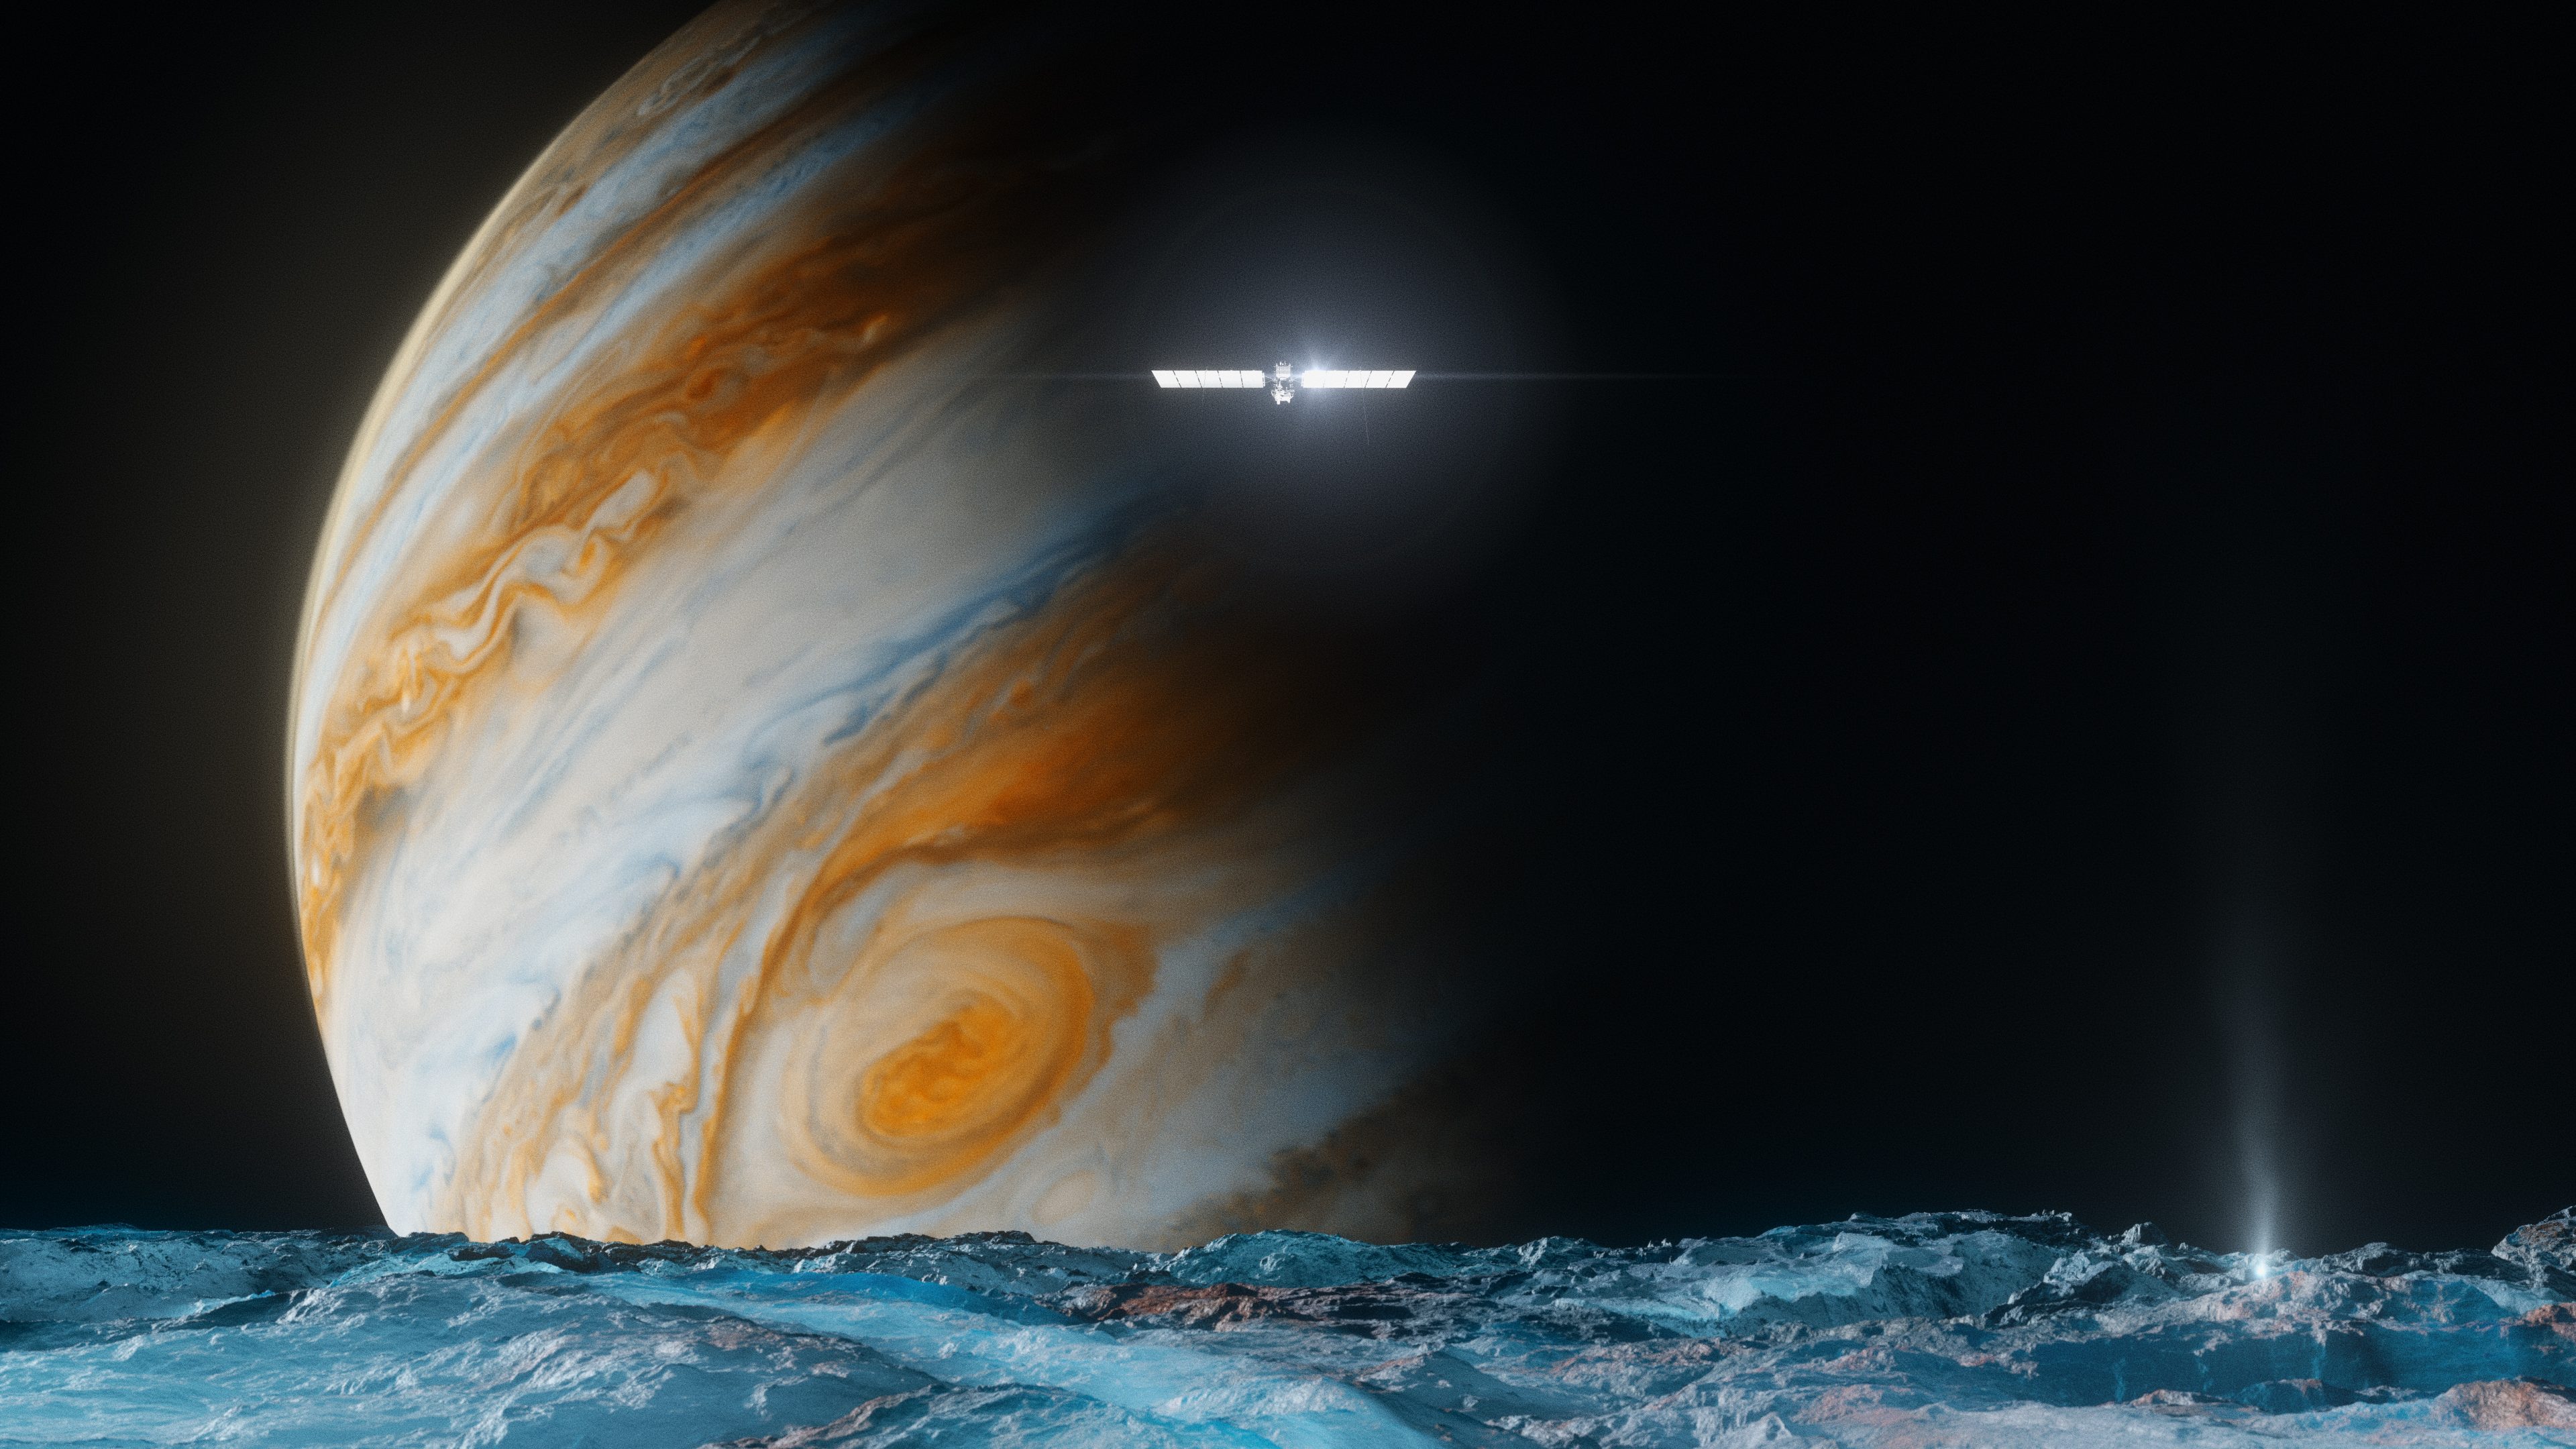 Illustration of Europa Clipper with Jupiter in the background and the surface of Europa below with a plume spraying up.